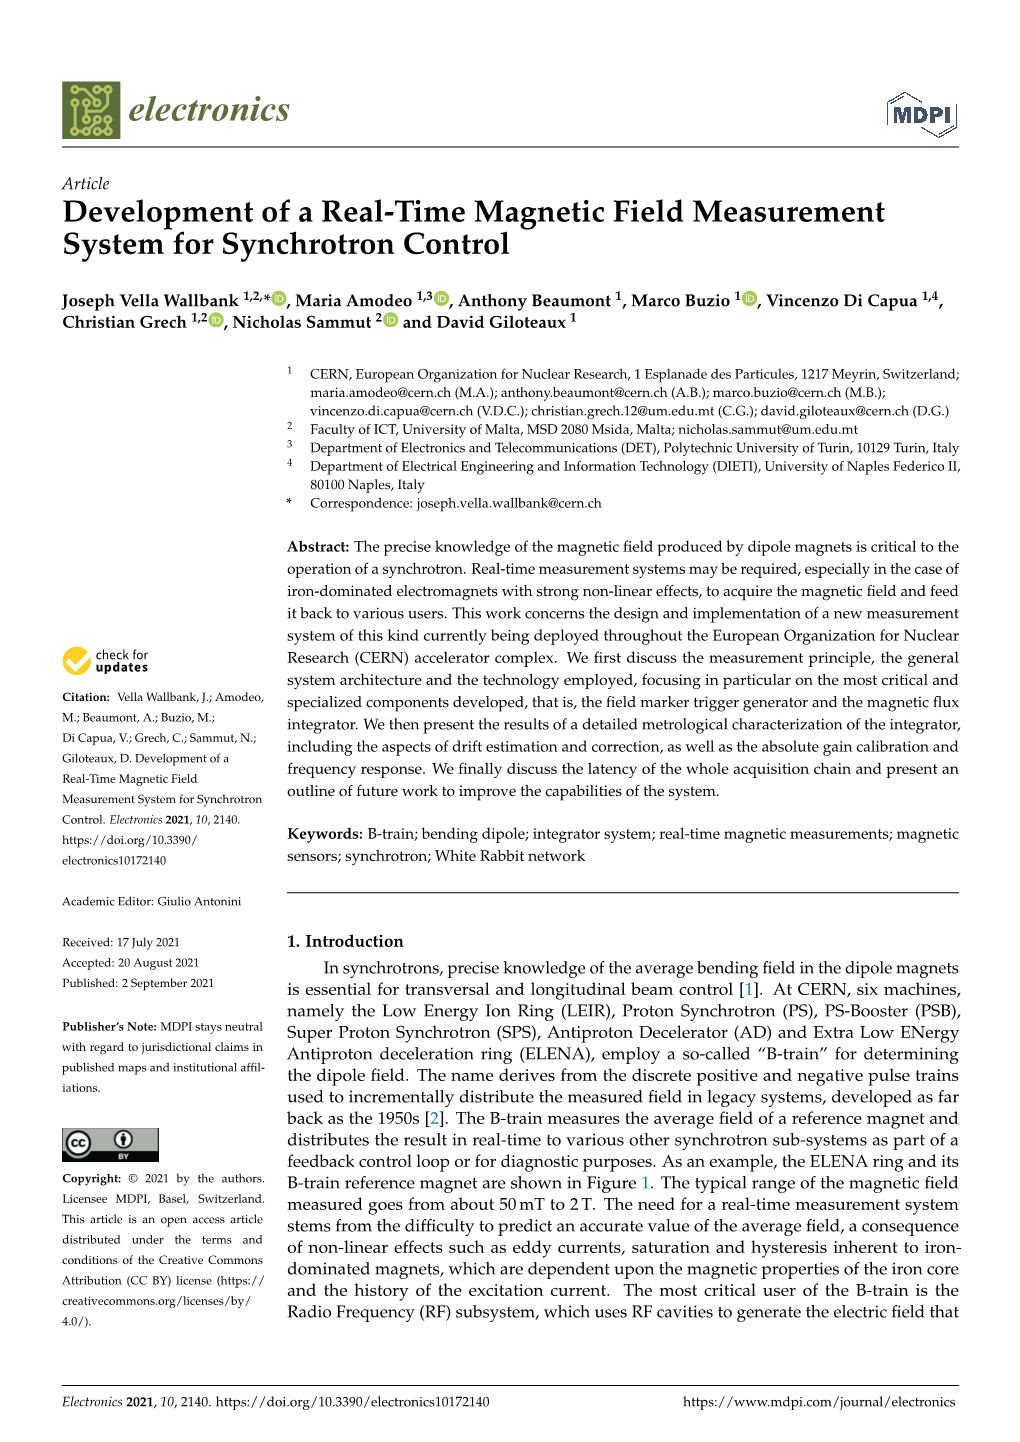 Development of a Real-Time Magnetic Field Measurement System for Synchrotron Control